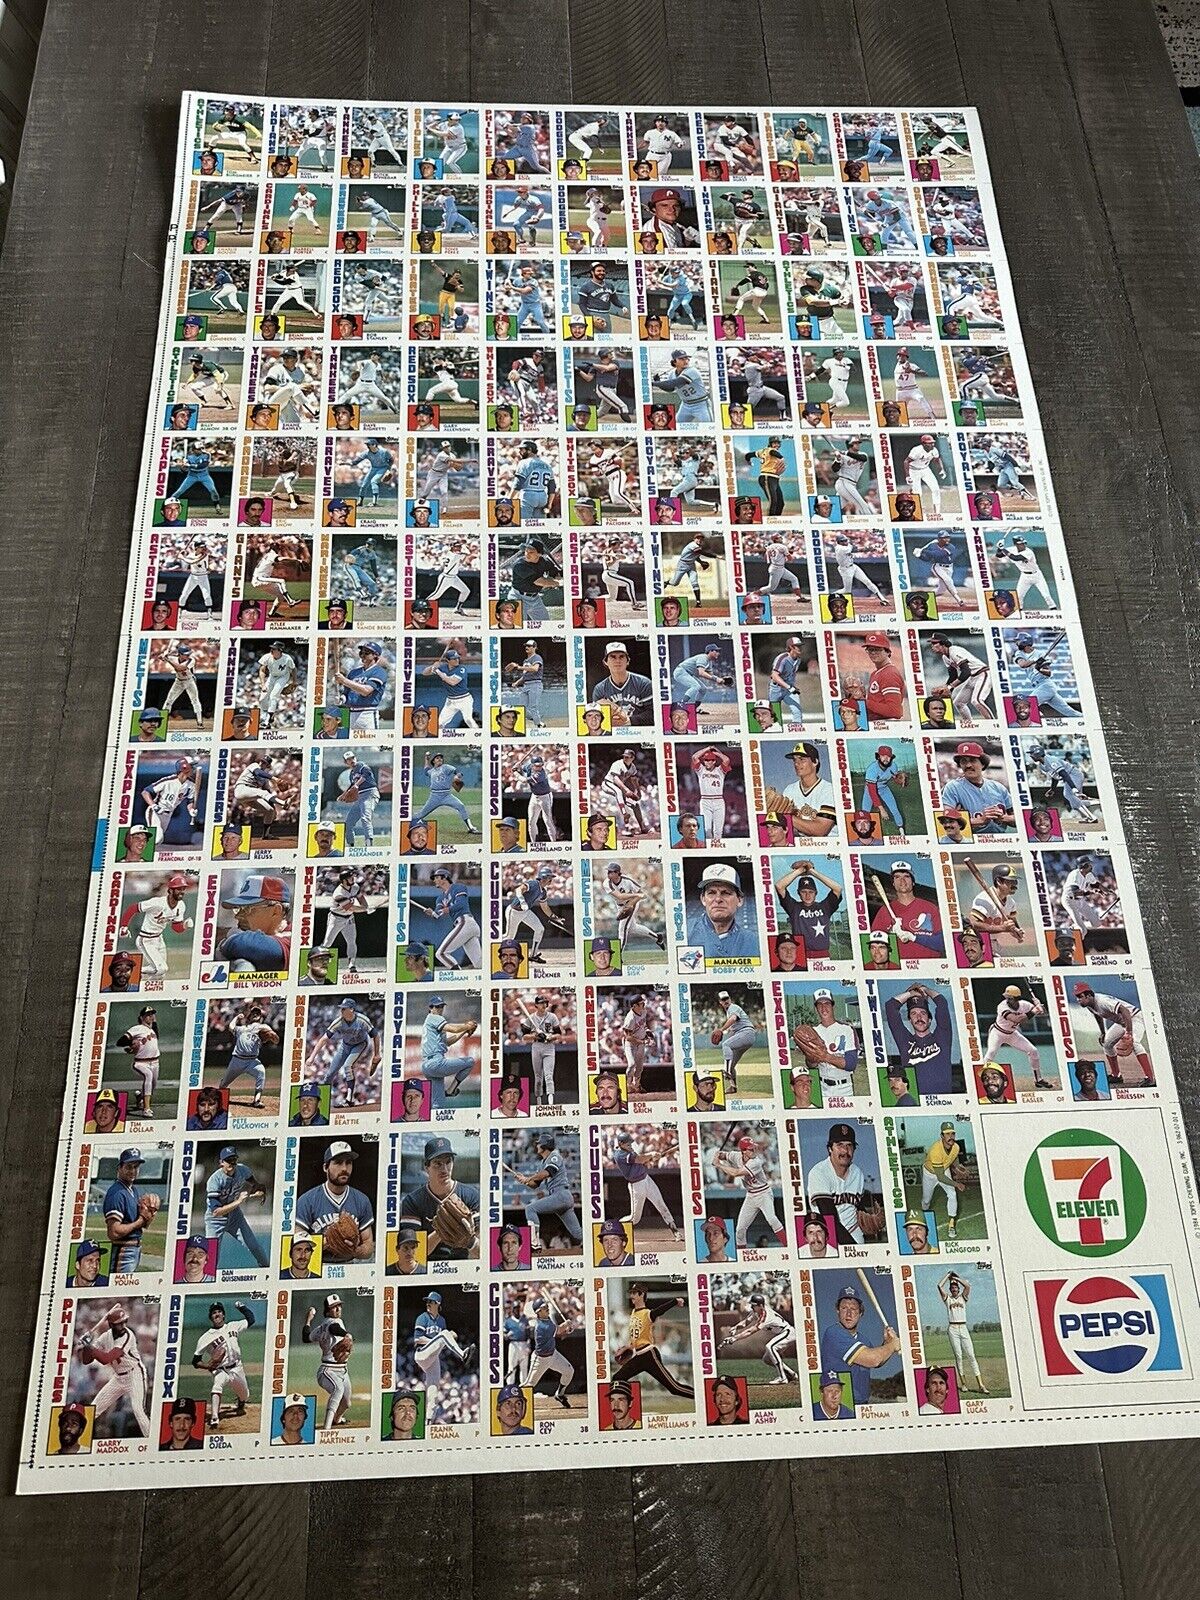 1984 Topps UNCUT Baseball Card Sheet Hall of Fame Players CASE FRESH CONDITION